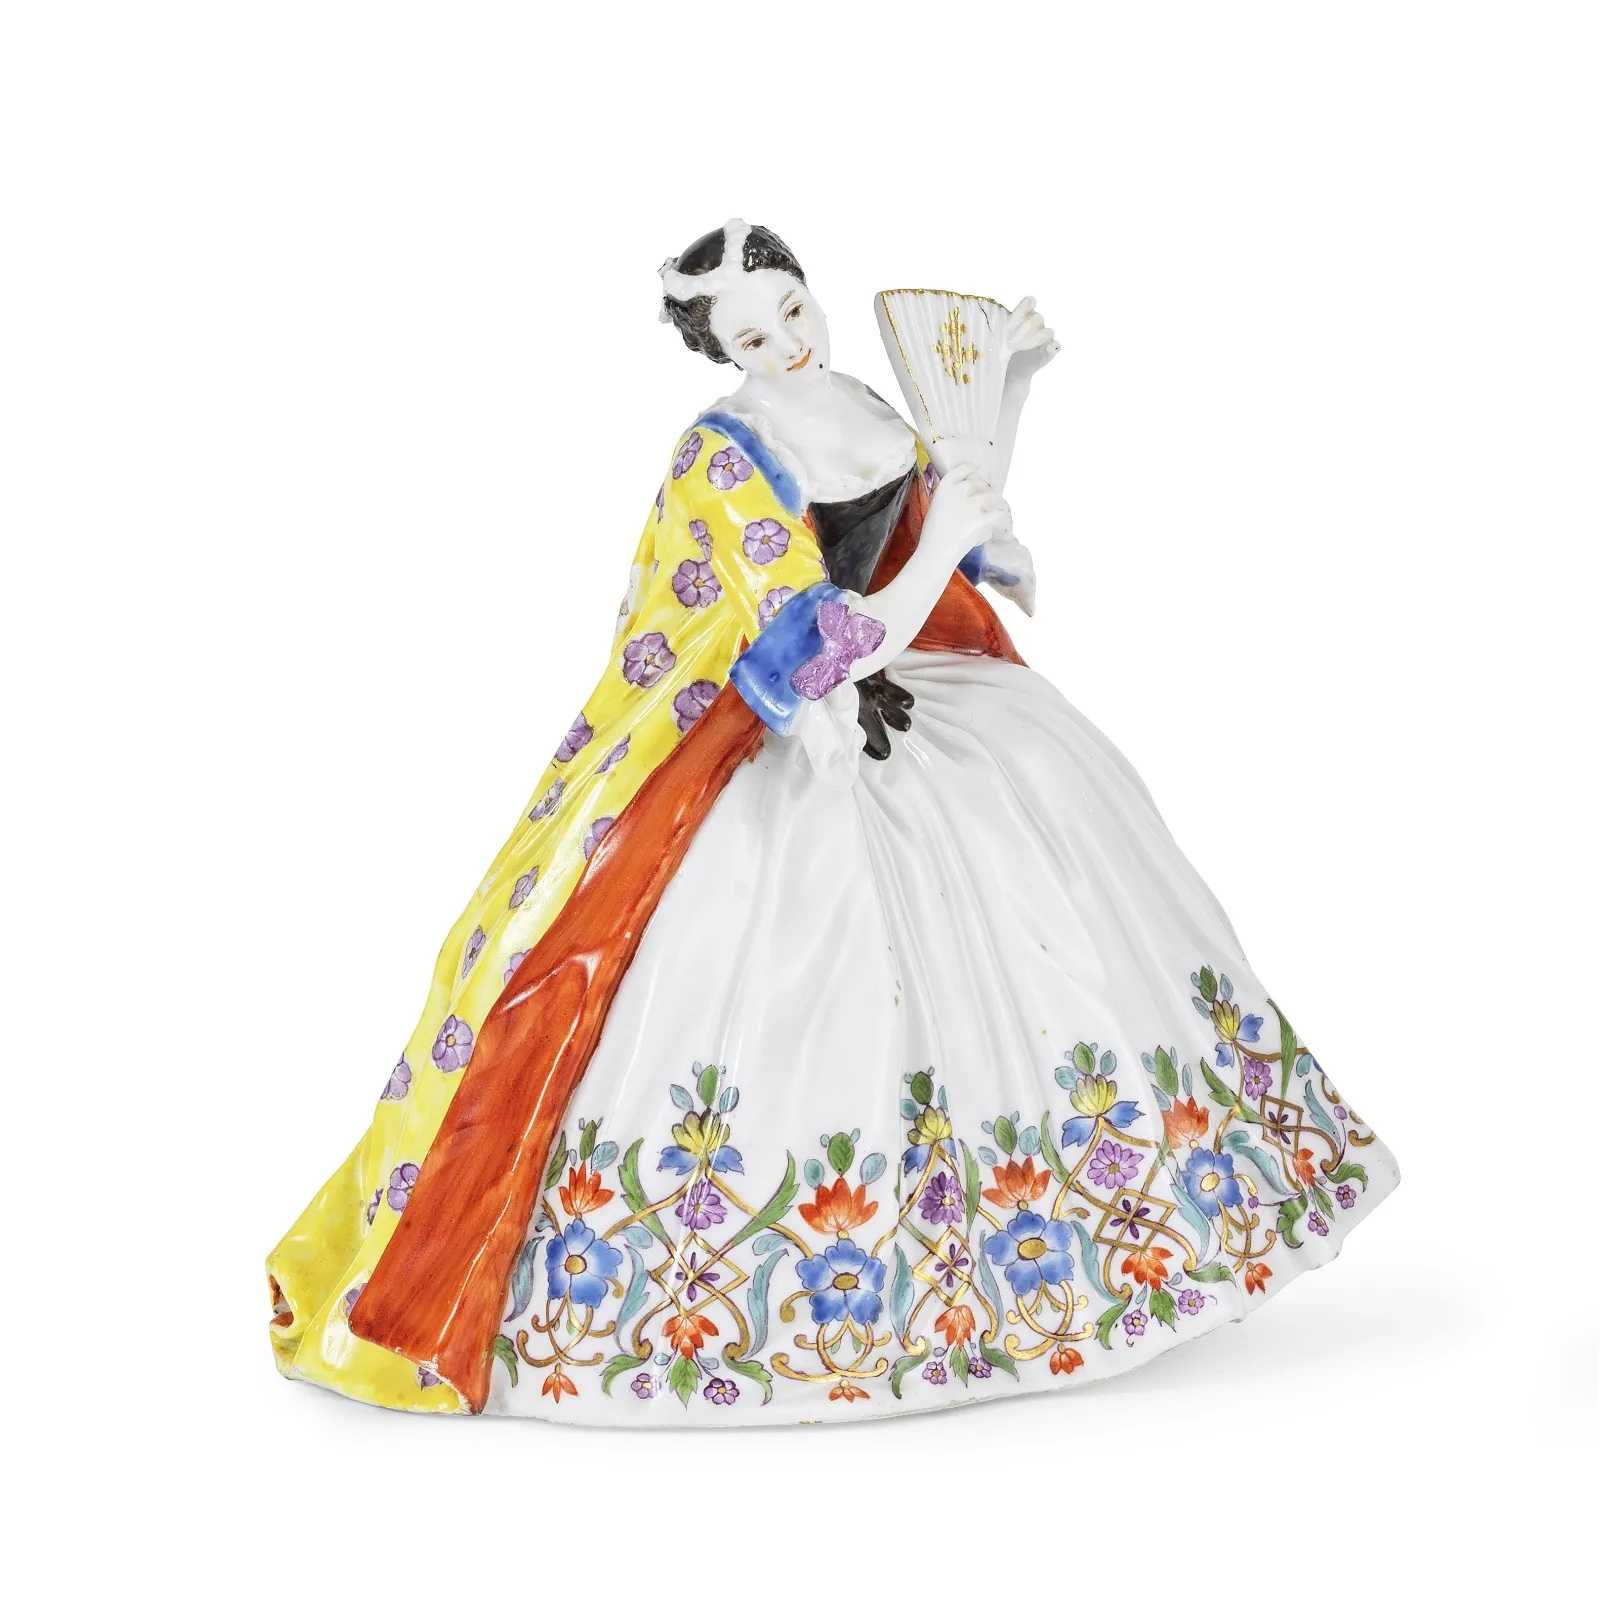 
Circa-1737 Meissen crinoline figure of a woman with a fan by Kaendler, which sold for €127,000 ($135,795) with buyer’s premium at Bonhams Paris.
